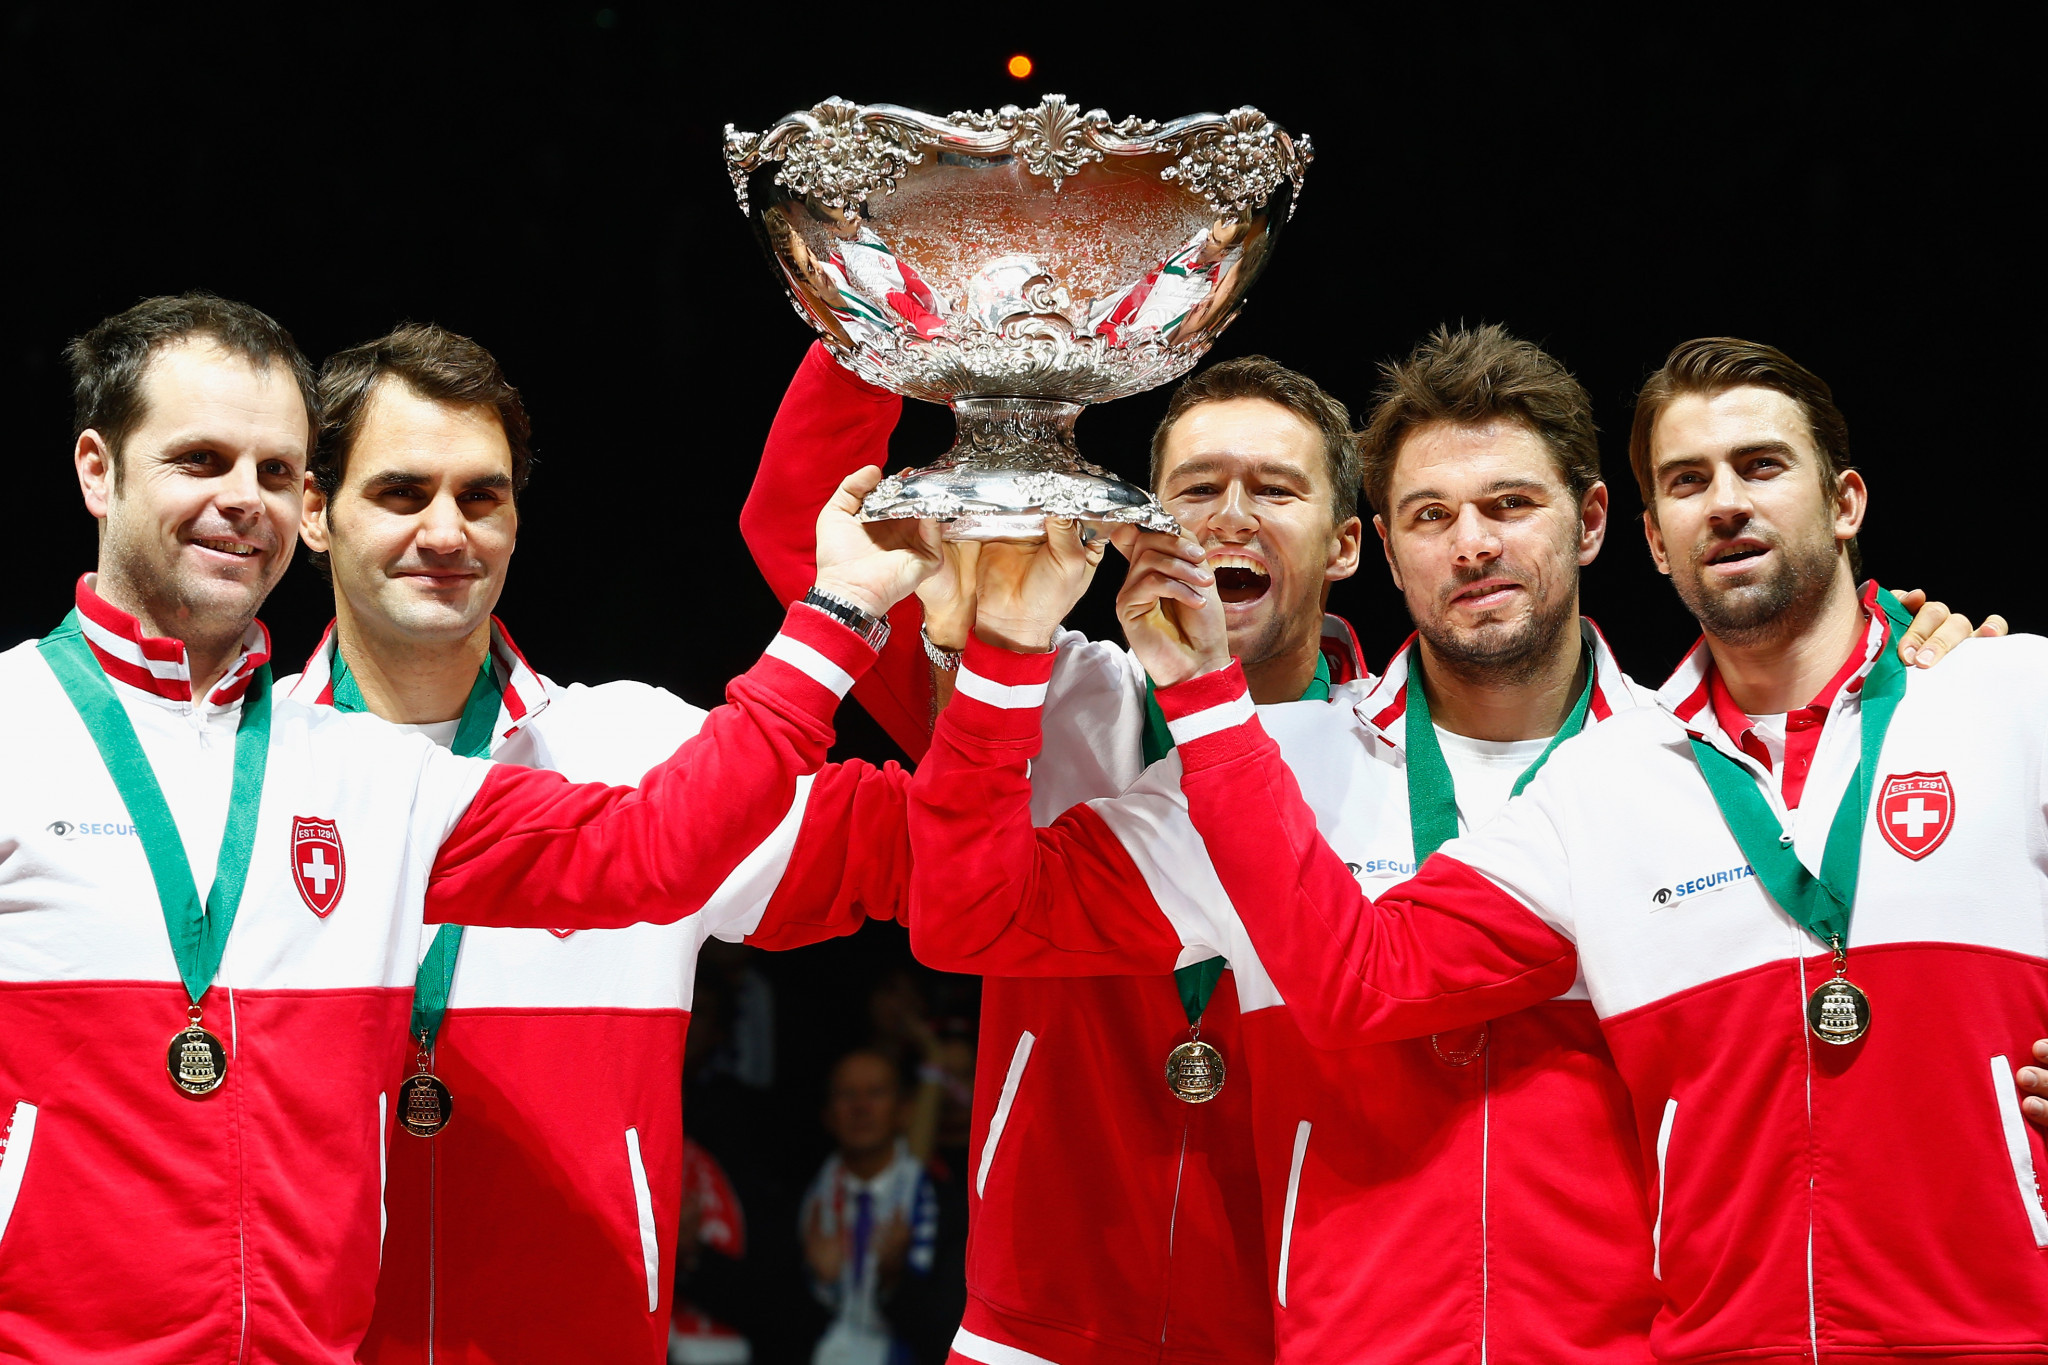 ITF open Fed and Davis Cup video archives in absence of live matches